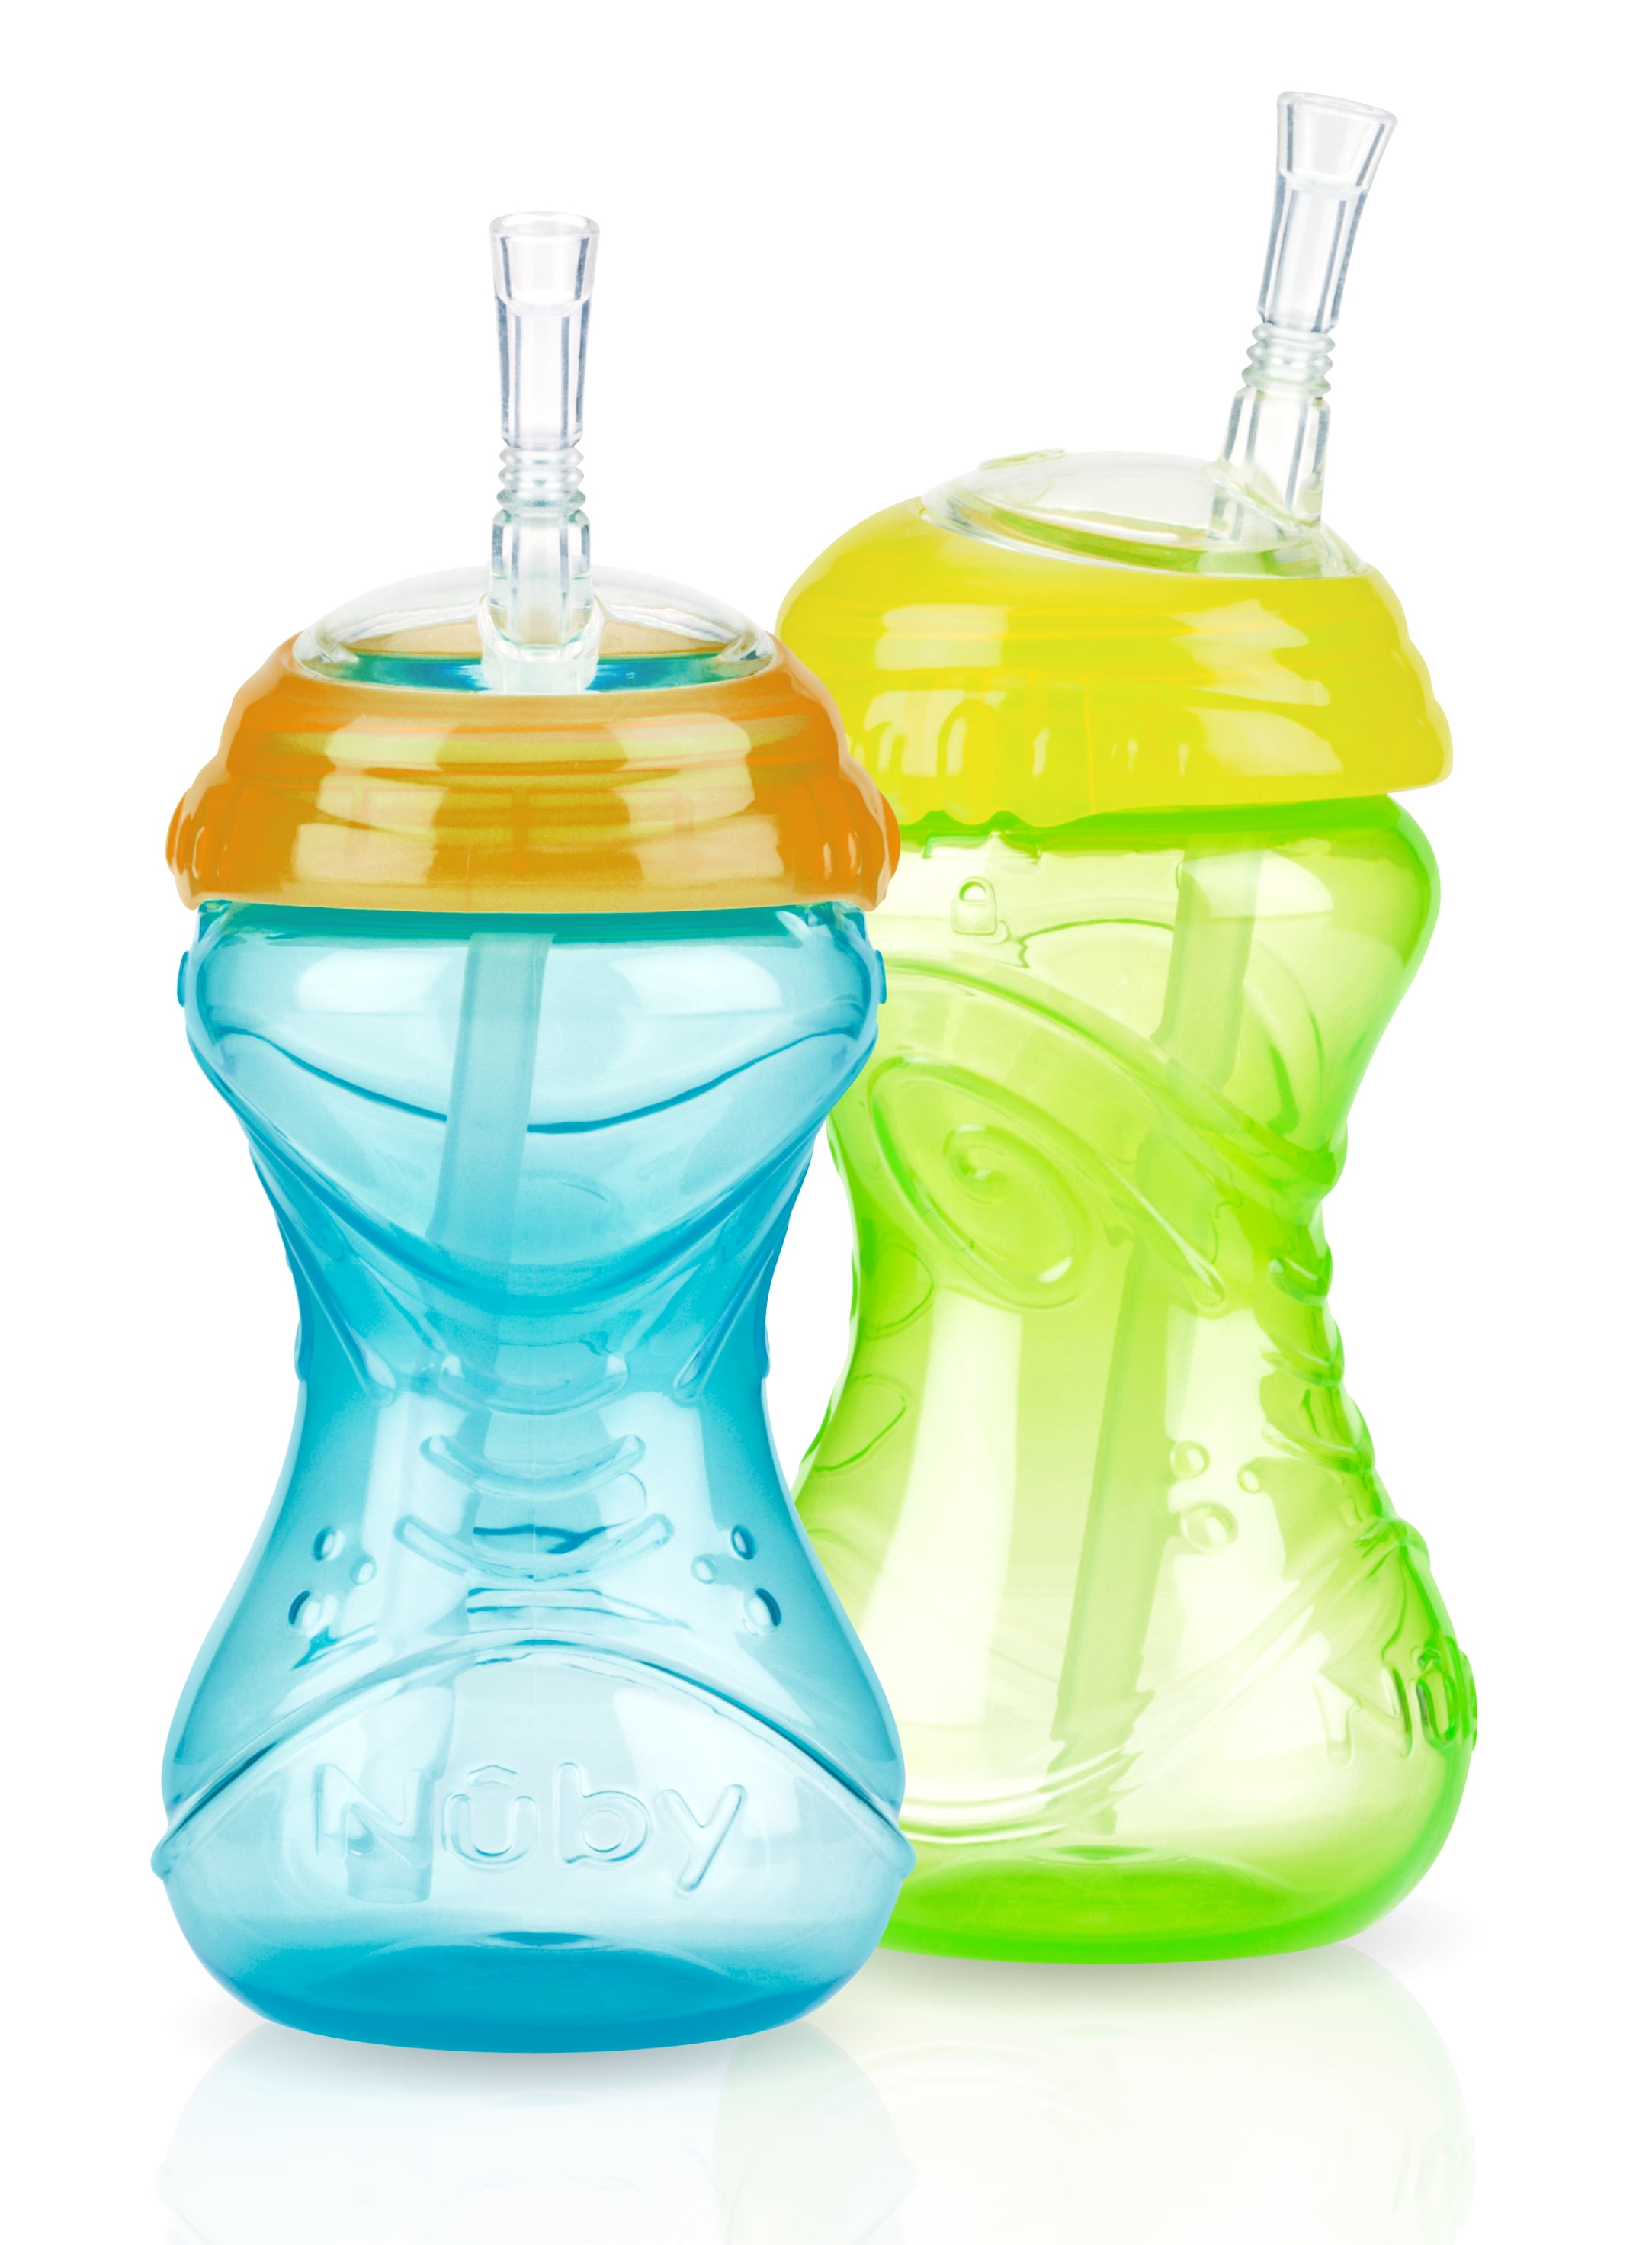 No-Spill Sport Sipper with Leakproof Straw